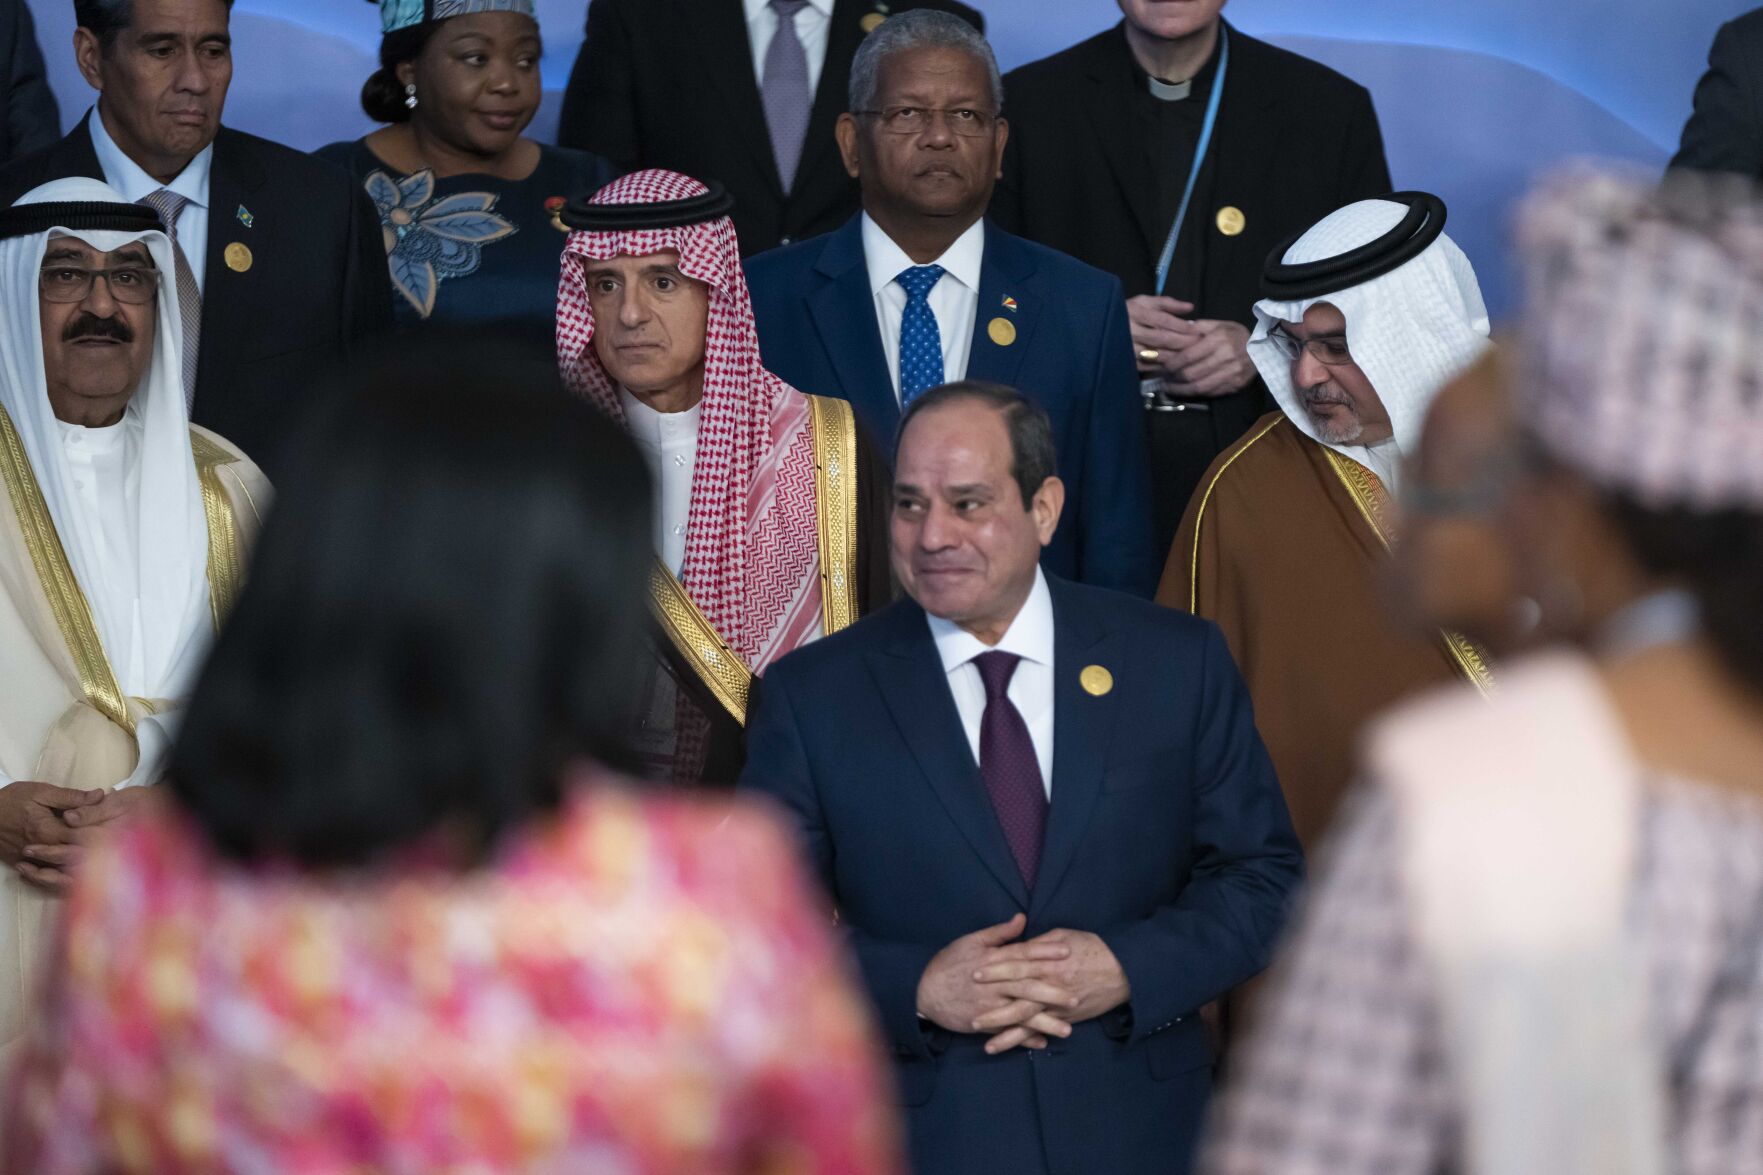 <p>Adel al-Jubeir, Saudi Arabia’s minister of state for foreign affairs, center left, and Egyptian President Abdel Fattah El-Sisi, front center, prepares with other leaders for a group photo at the COP27 U.N. Climate Summit, in Sharm el-Sheikh, Egypt, Monday, Nov. 7, 2022. (AP Photo/Nariman El-Mofty)</p>   PHOTO CREDIT: Nariman El-Mofty - staff, AP